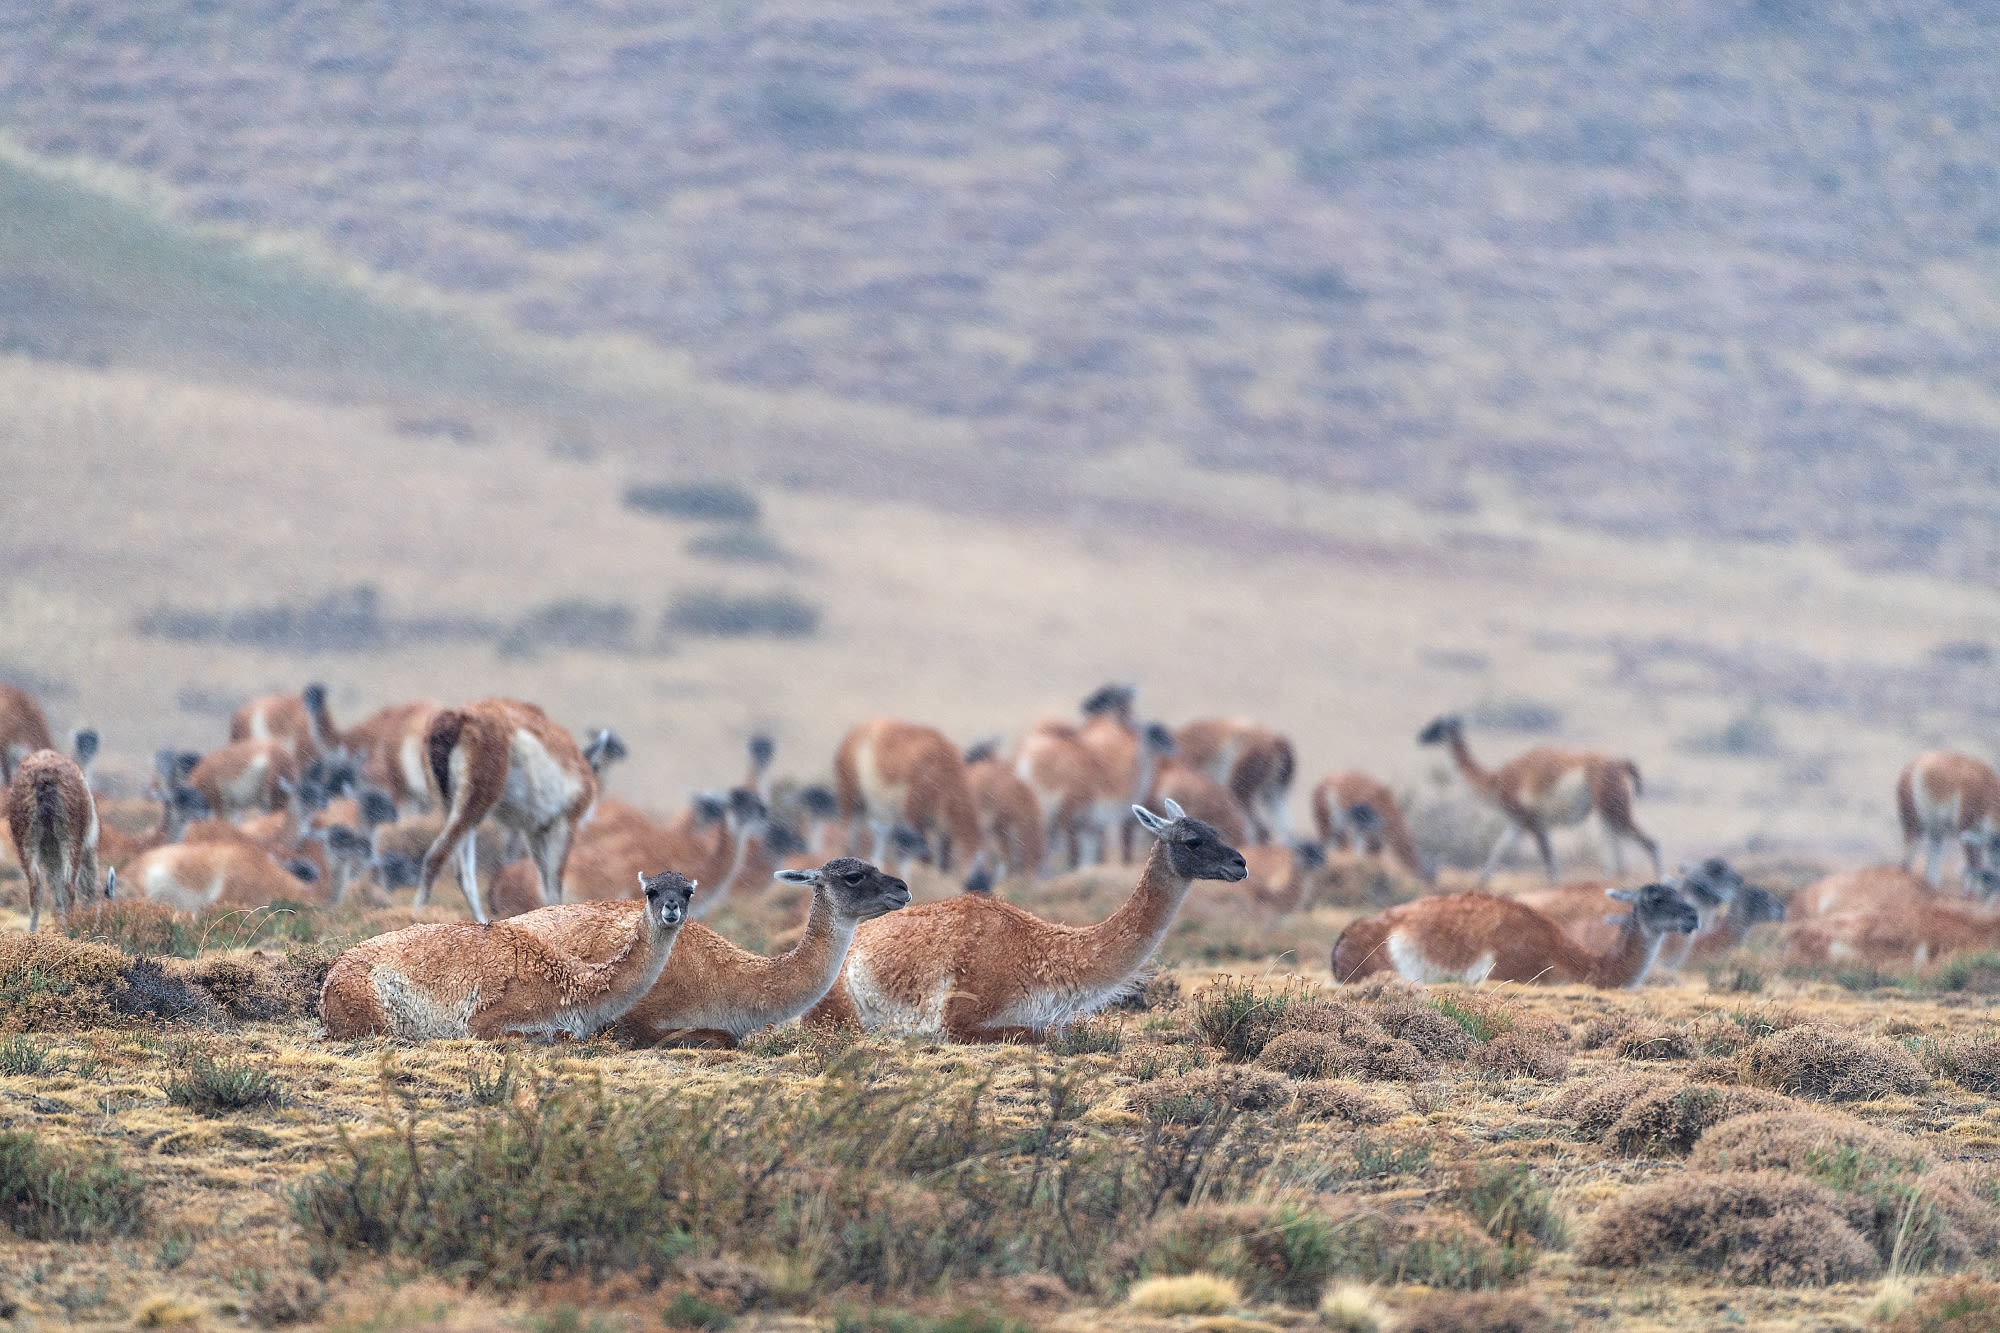 Pumas living in co-existence with livestock, guanacos